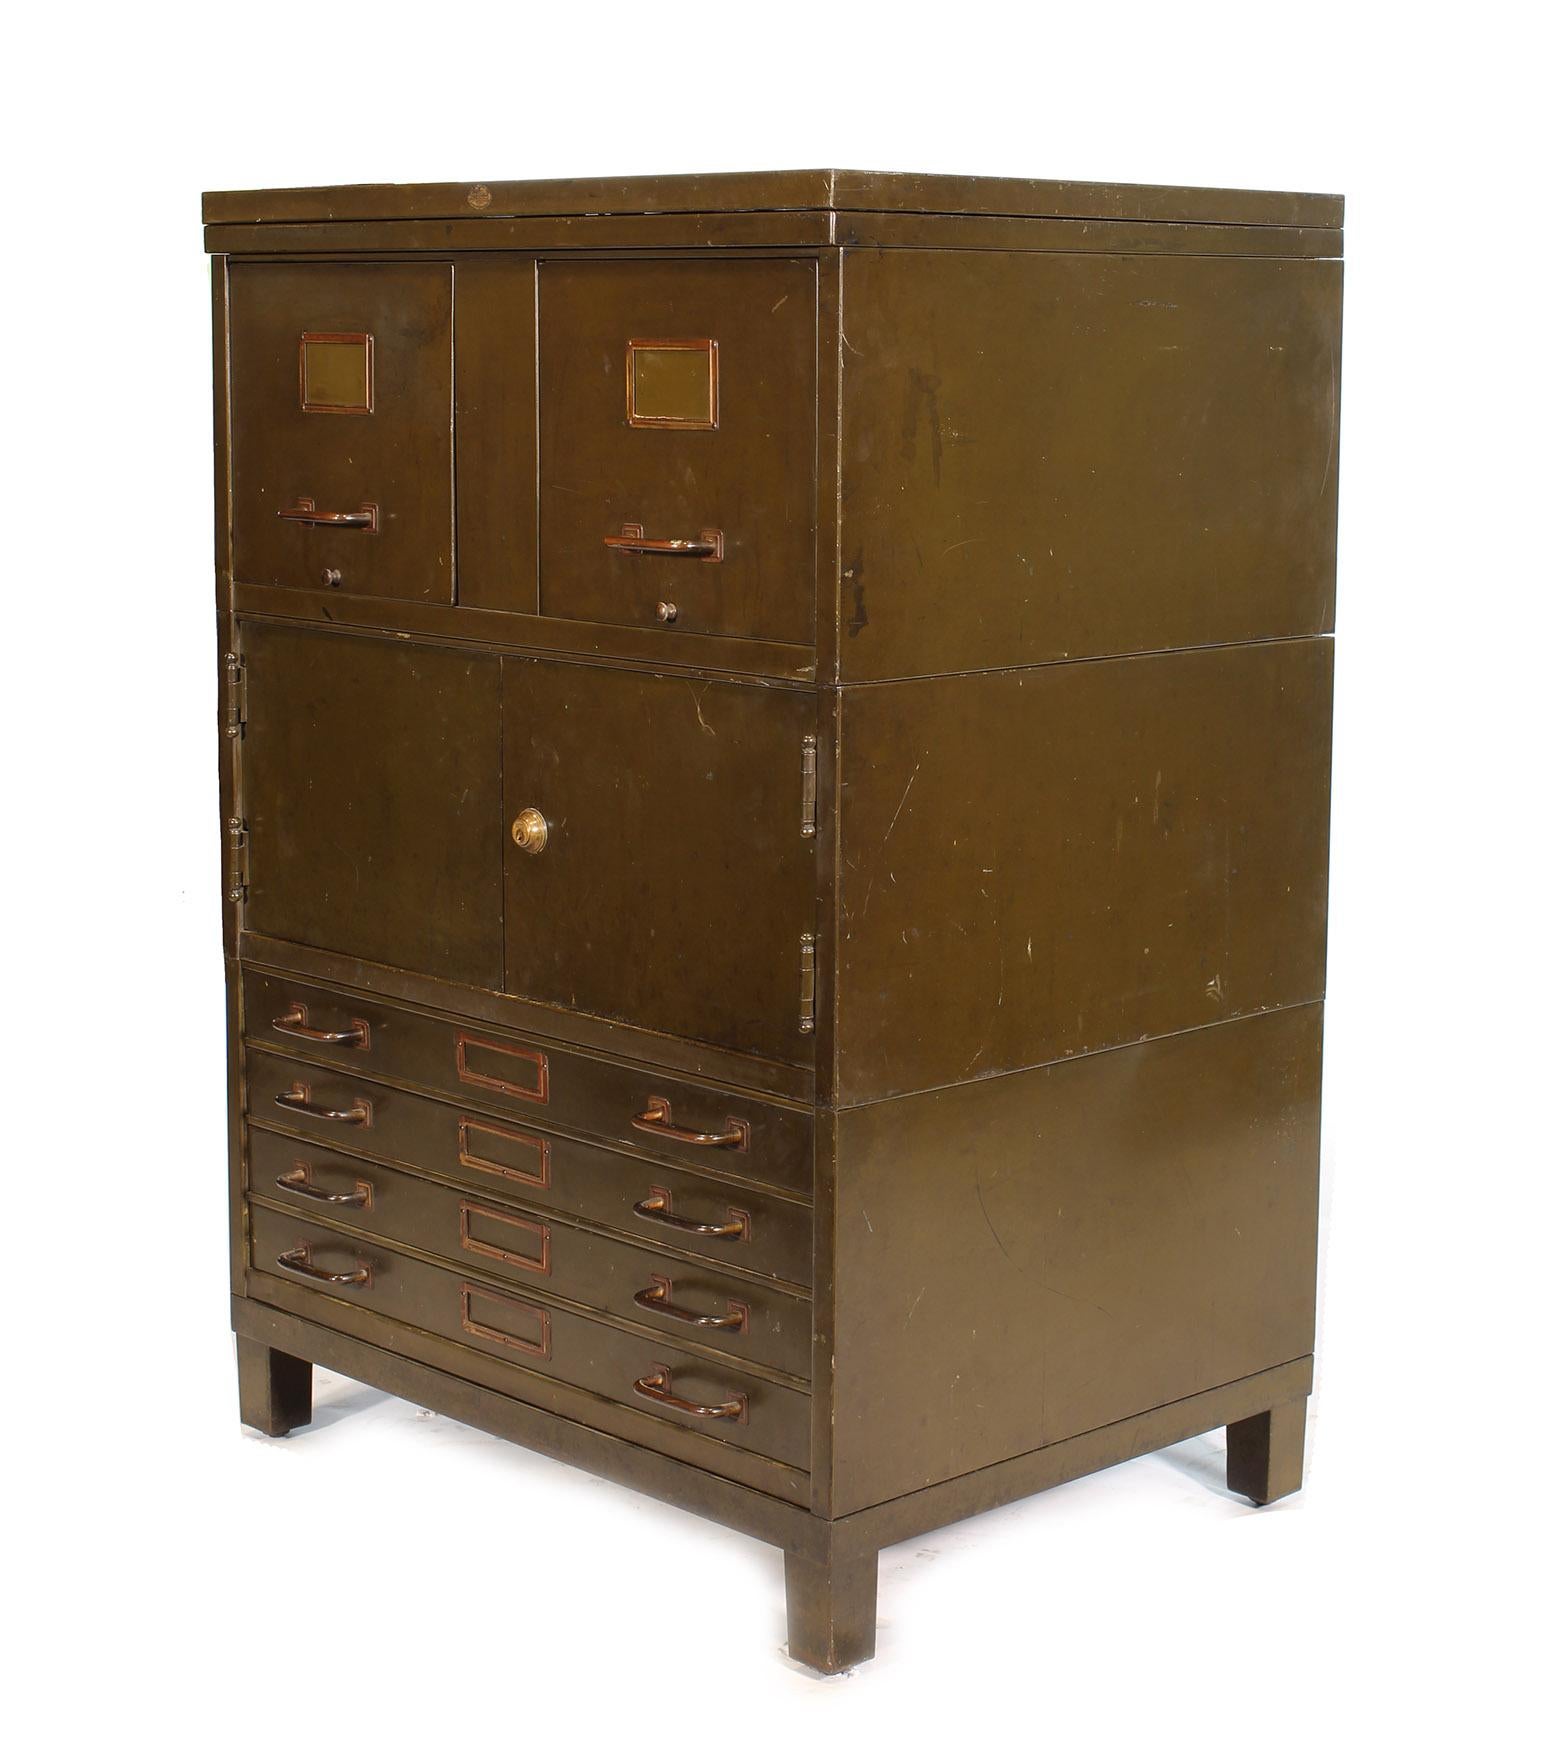 Vintage art metal filing cabinet with a storage compartment and flat file map storage. Measures 32 3/4